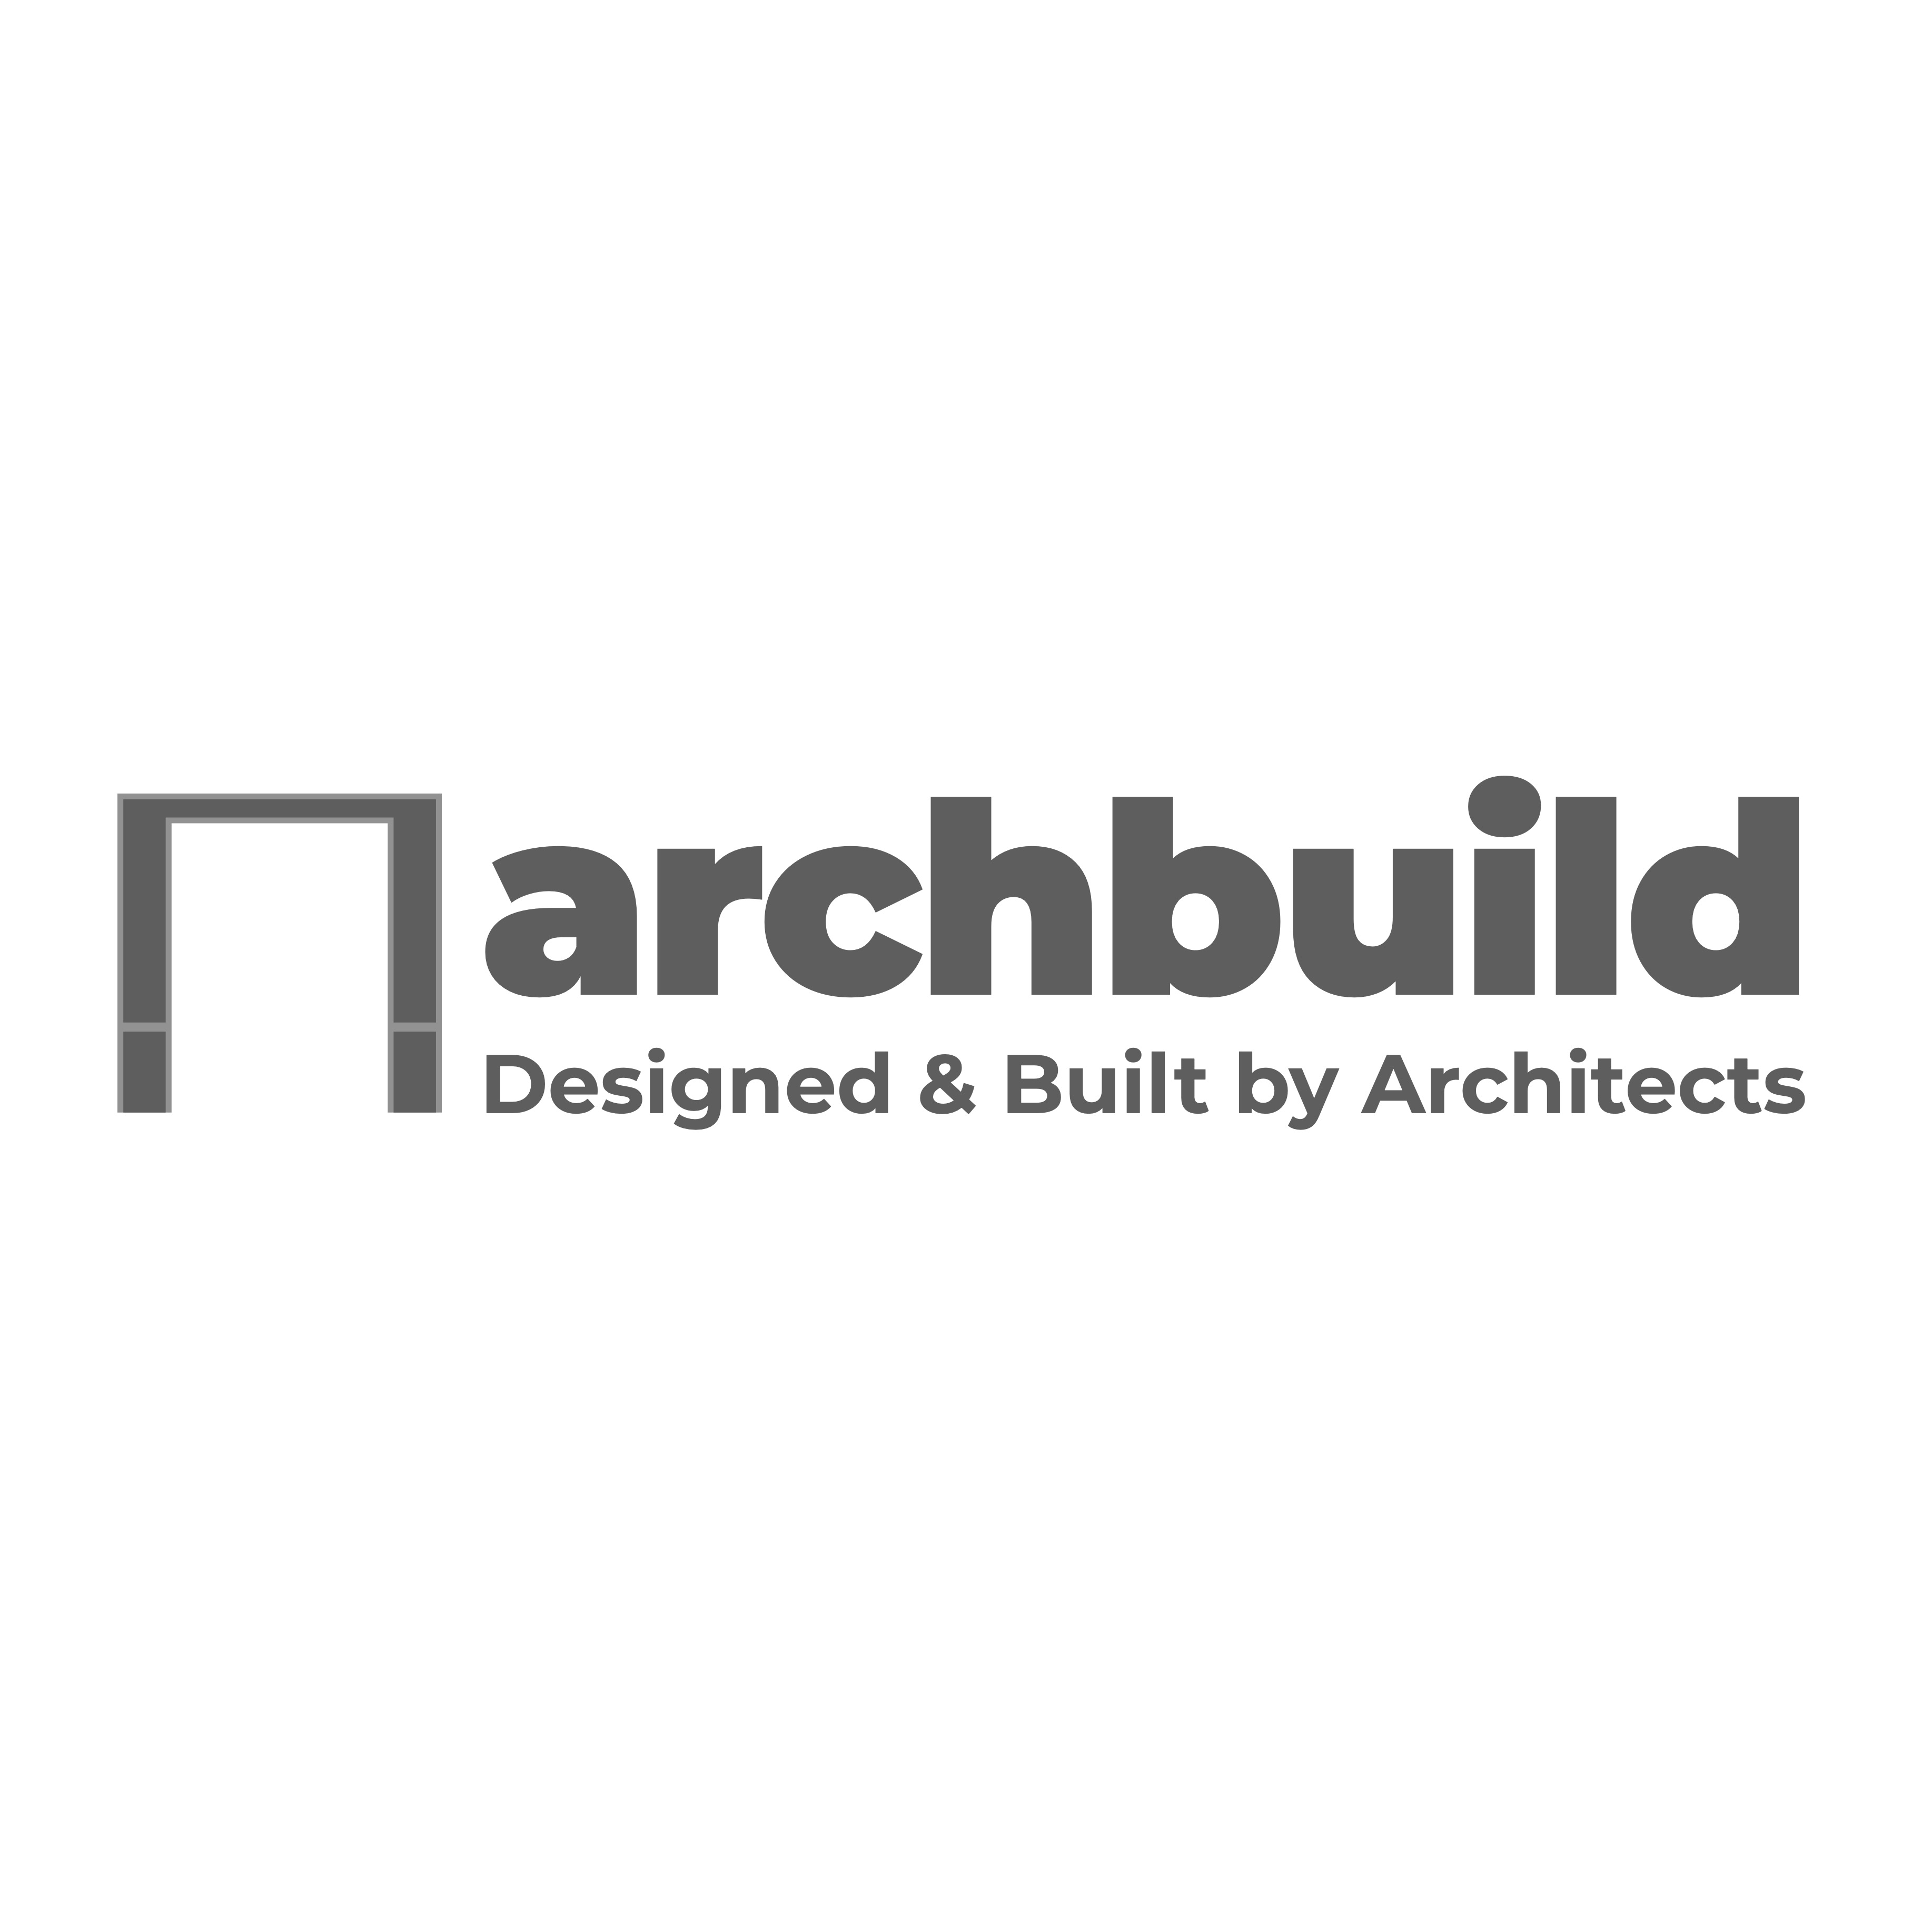 Archbuild architects + builders - West Pennant Hills, NSW 2125 - (02) 7253 3201 | ShowMeLocal.com